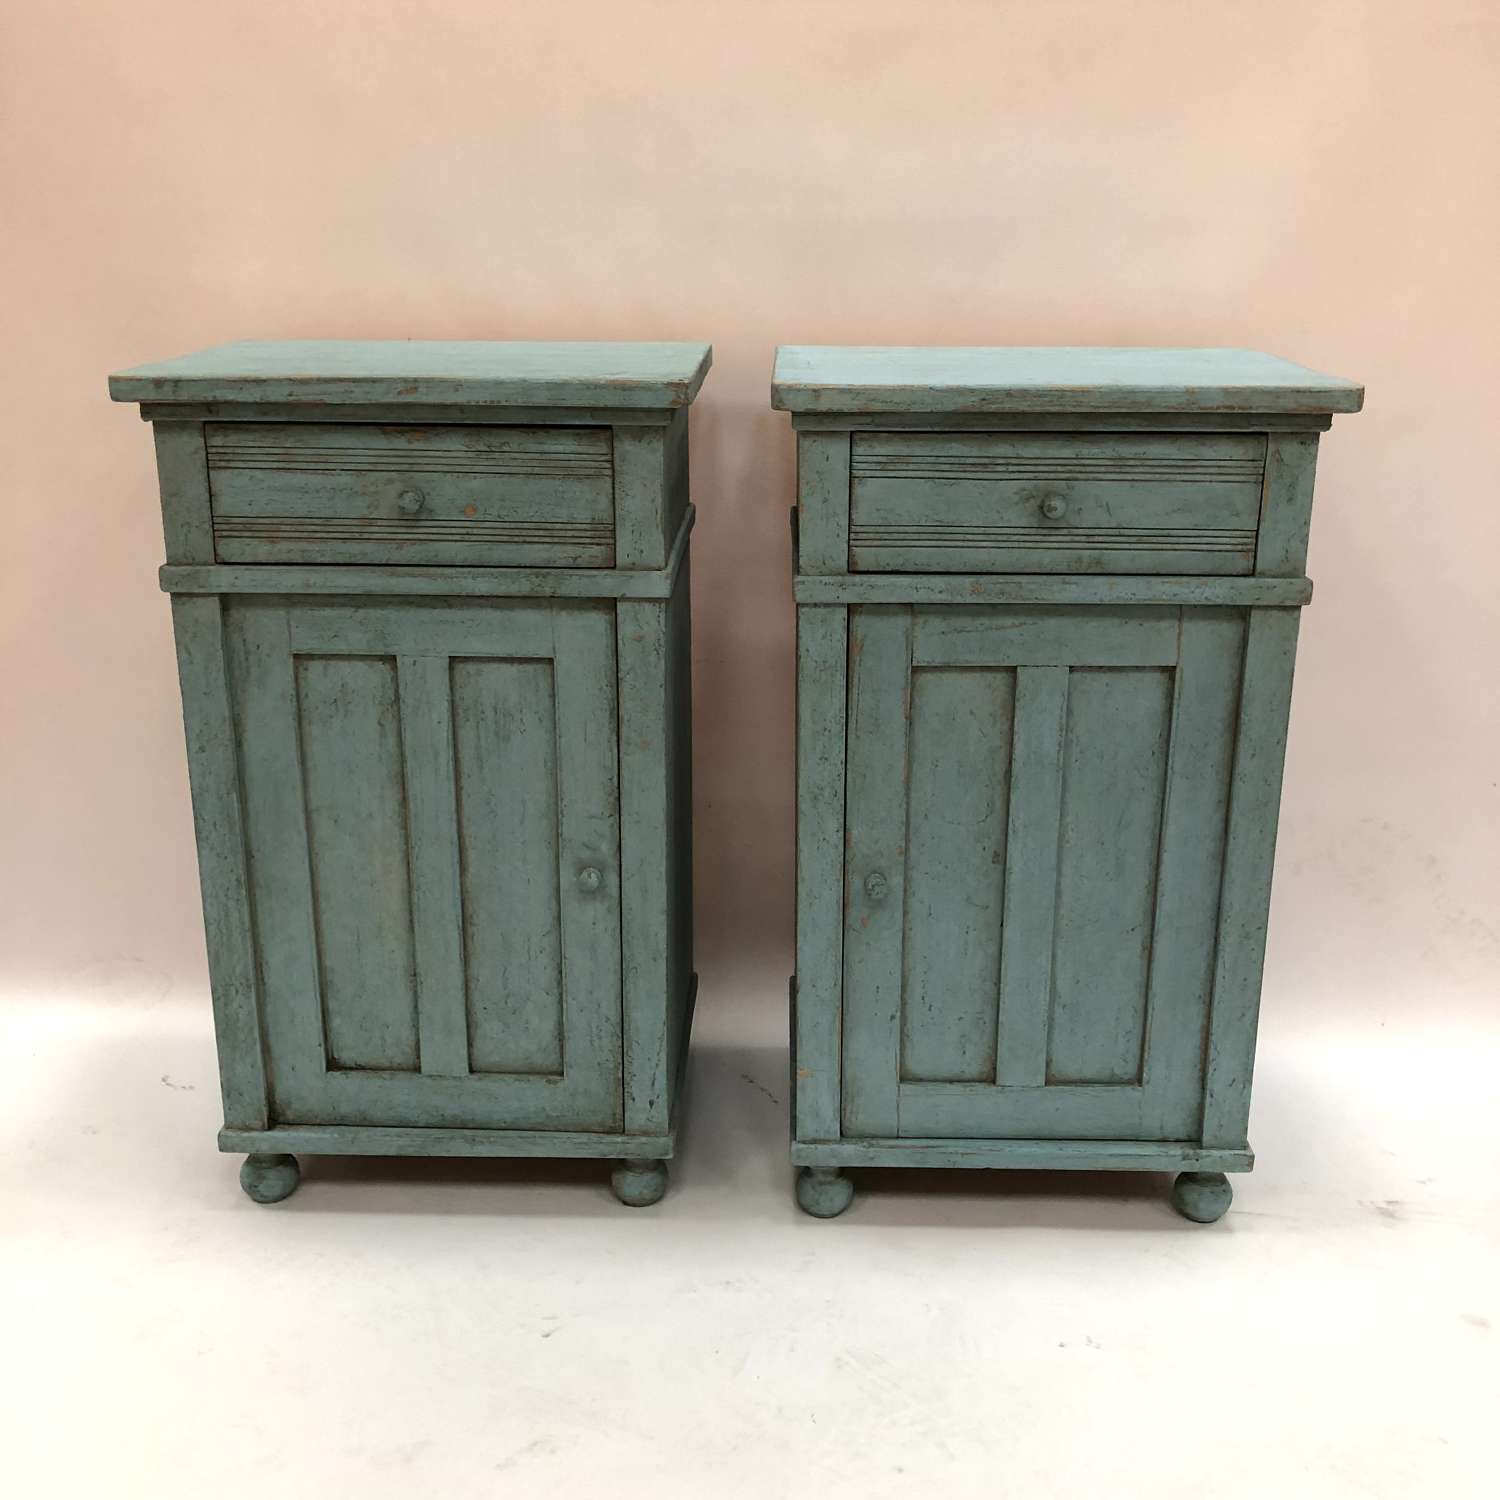 A pair of Swedish bedside tables